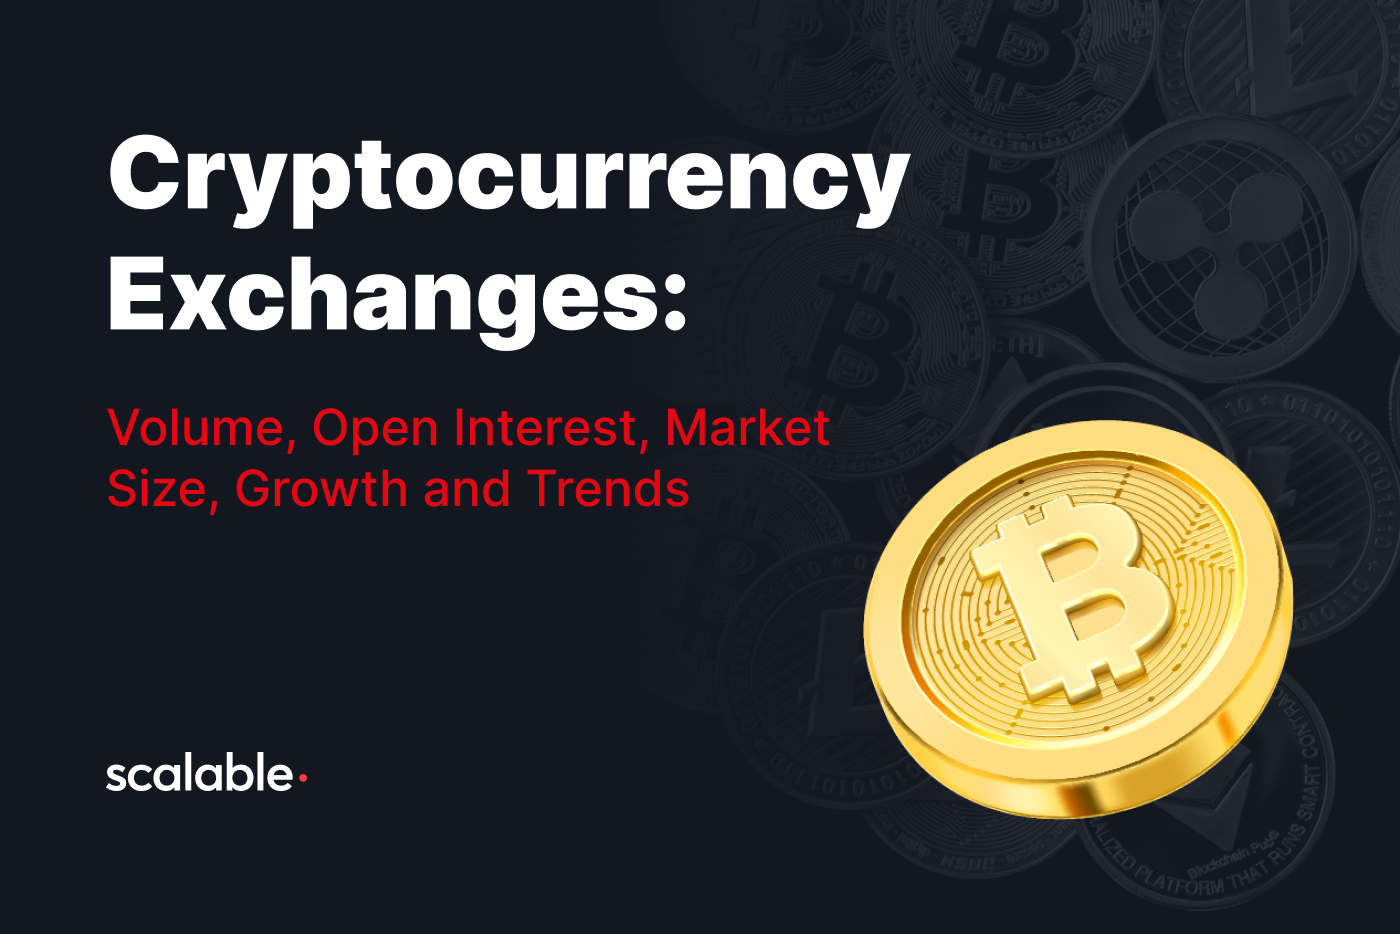 Cryptocurrency Exchanges: Volume, Open Interest, Market Size, Growth and Trends